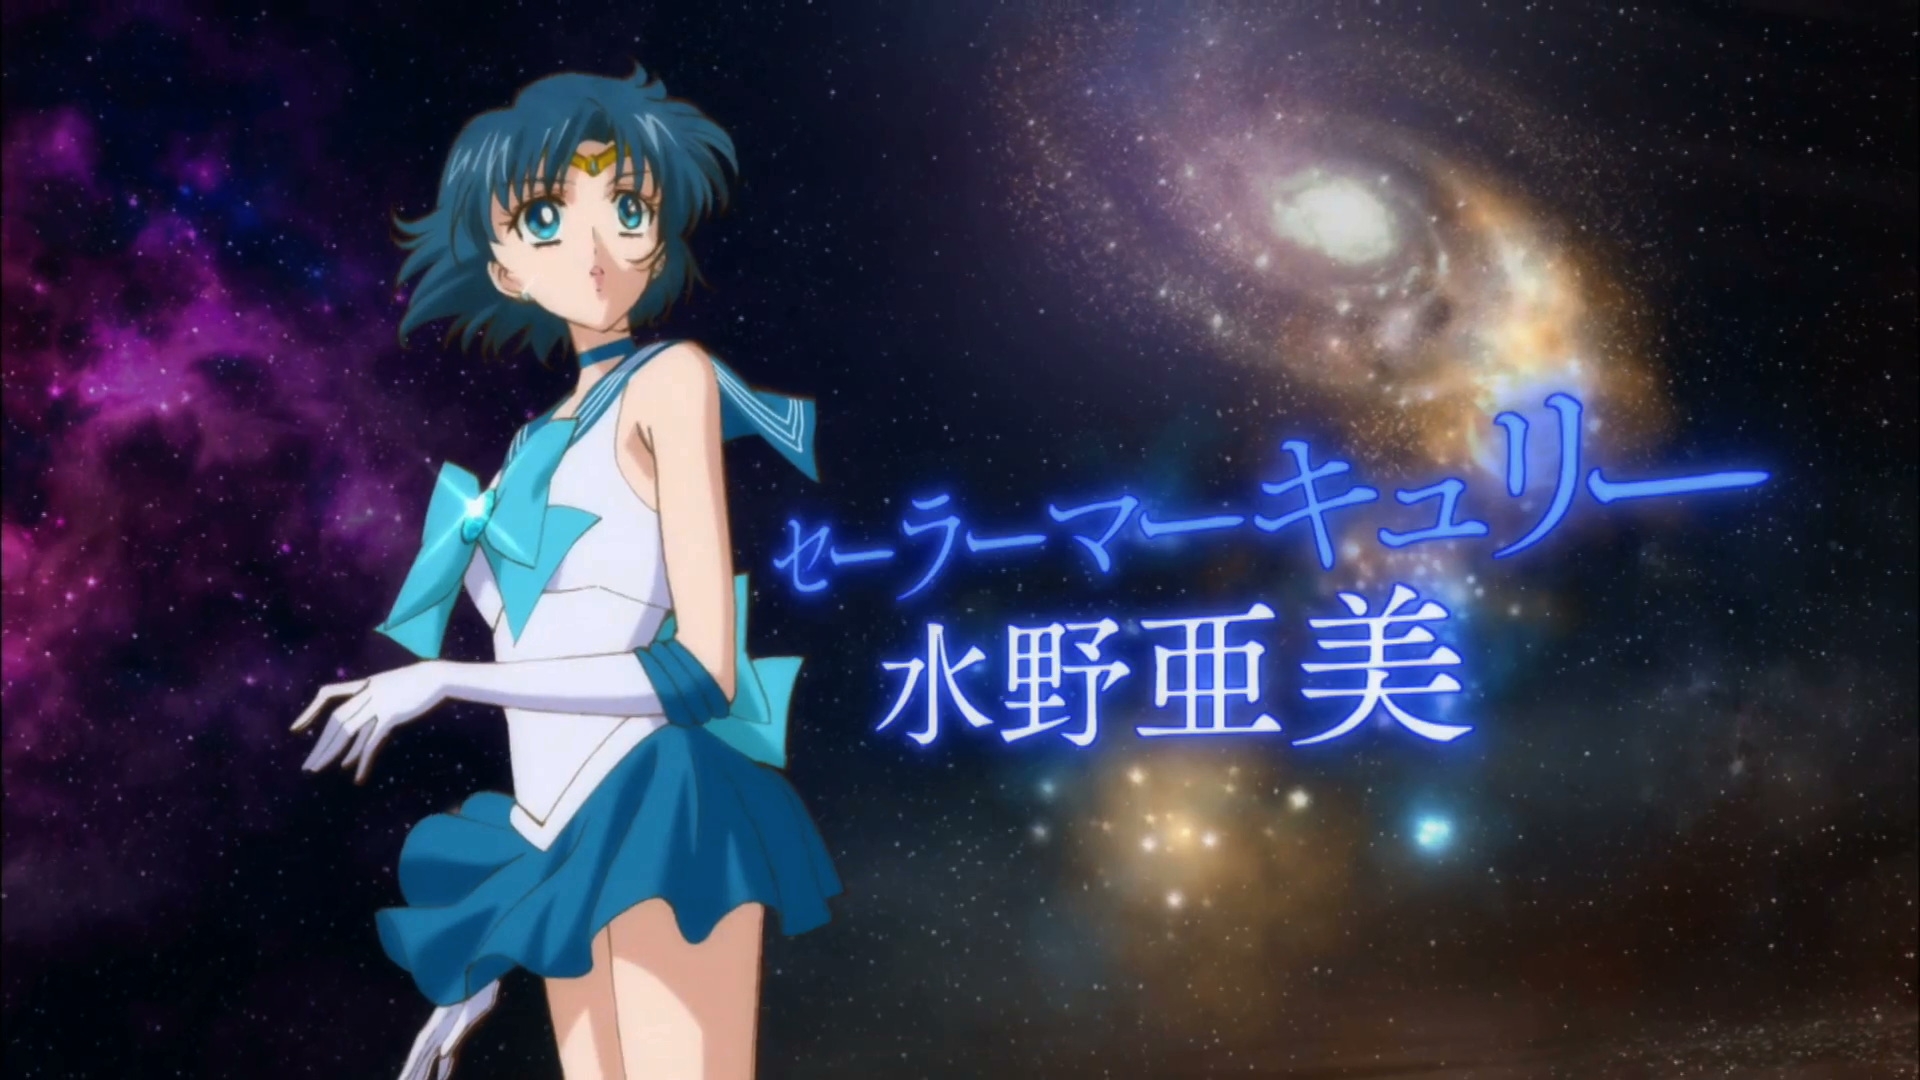 Sailor Mercury A Wallpaper Of With Her Name As